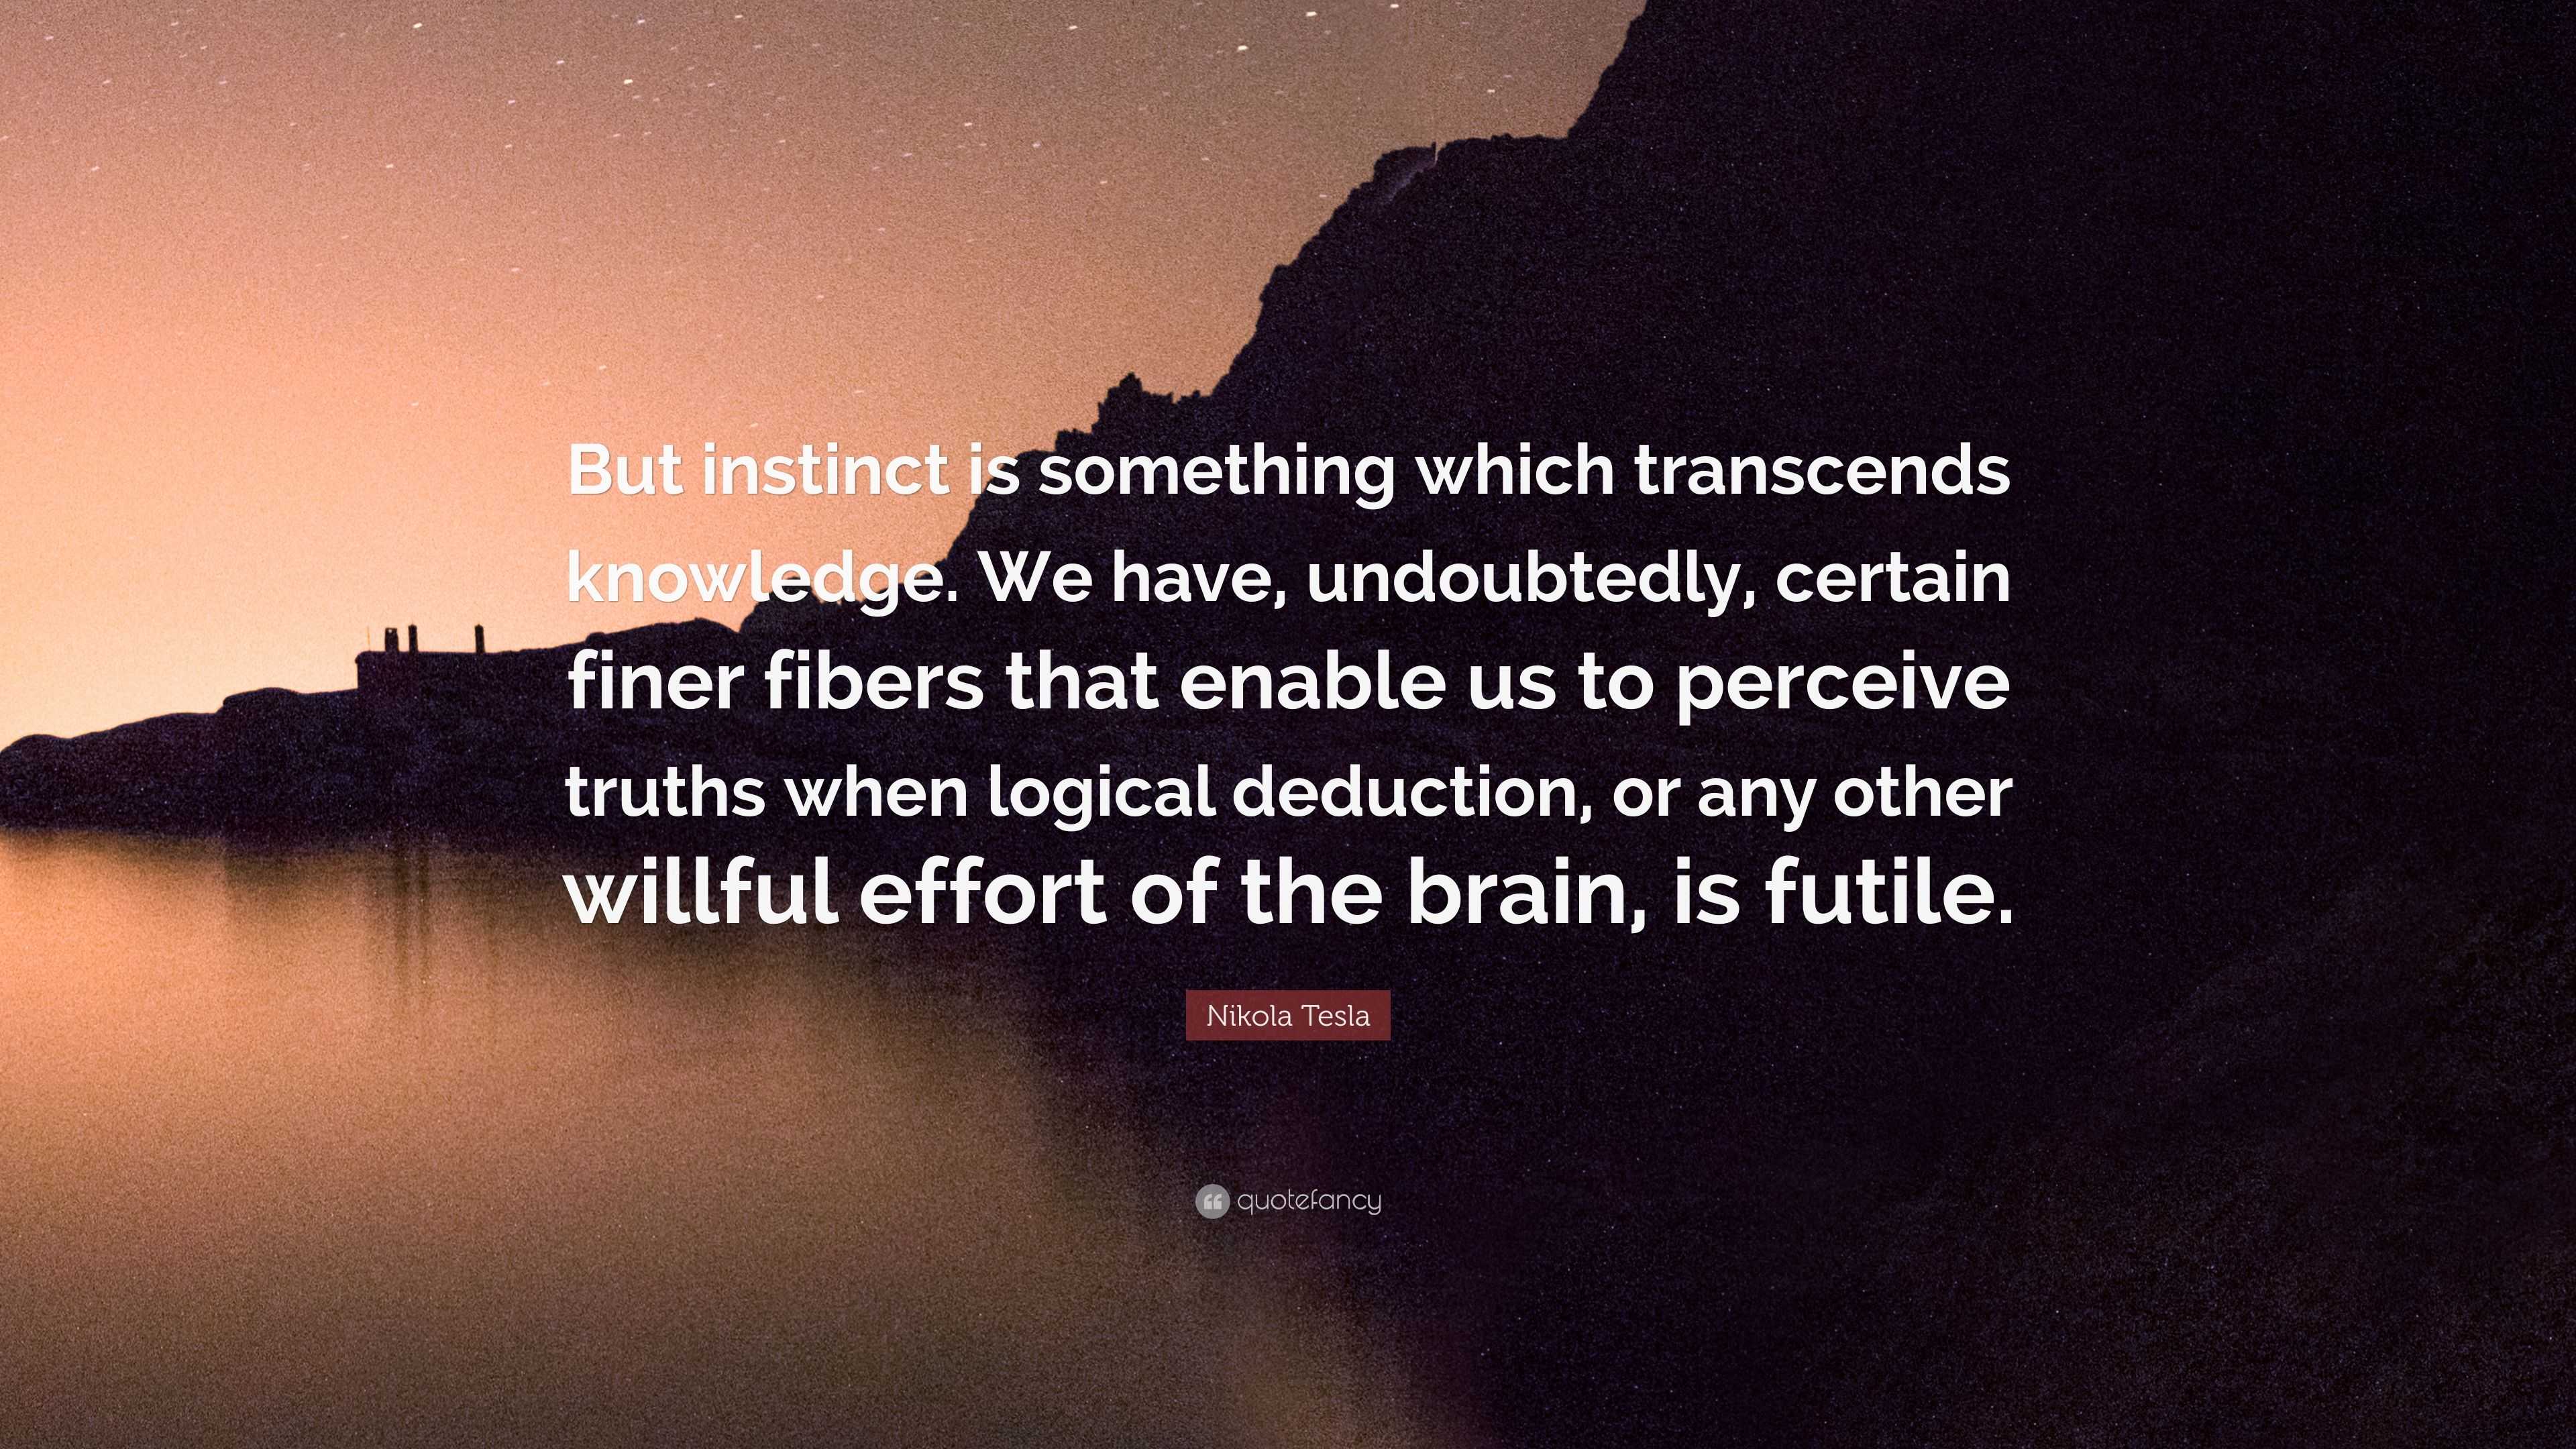 Nikola Tesla Quote “But instinct is something which transcends knowledge We have